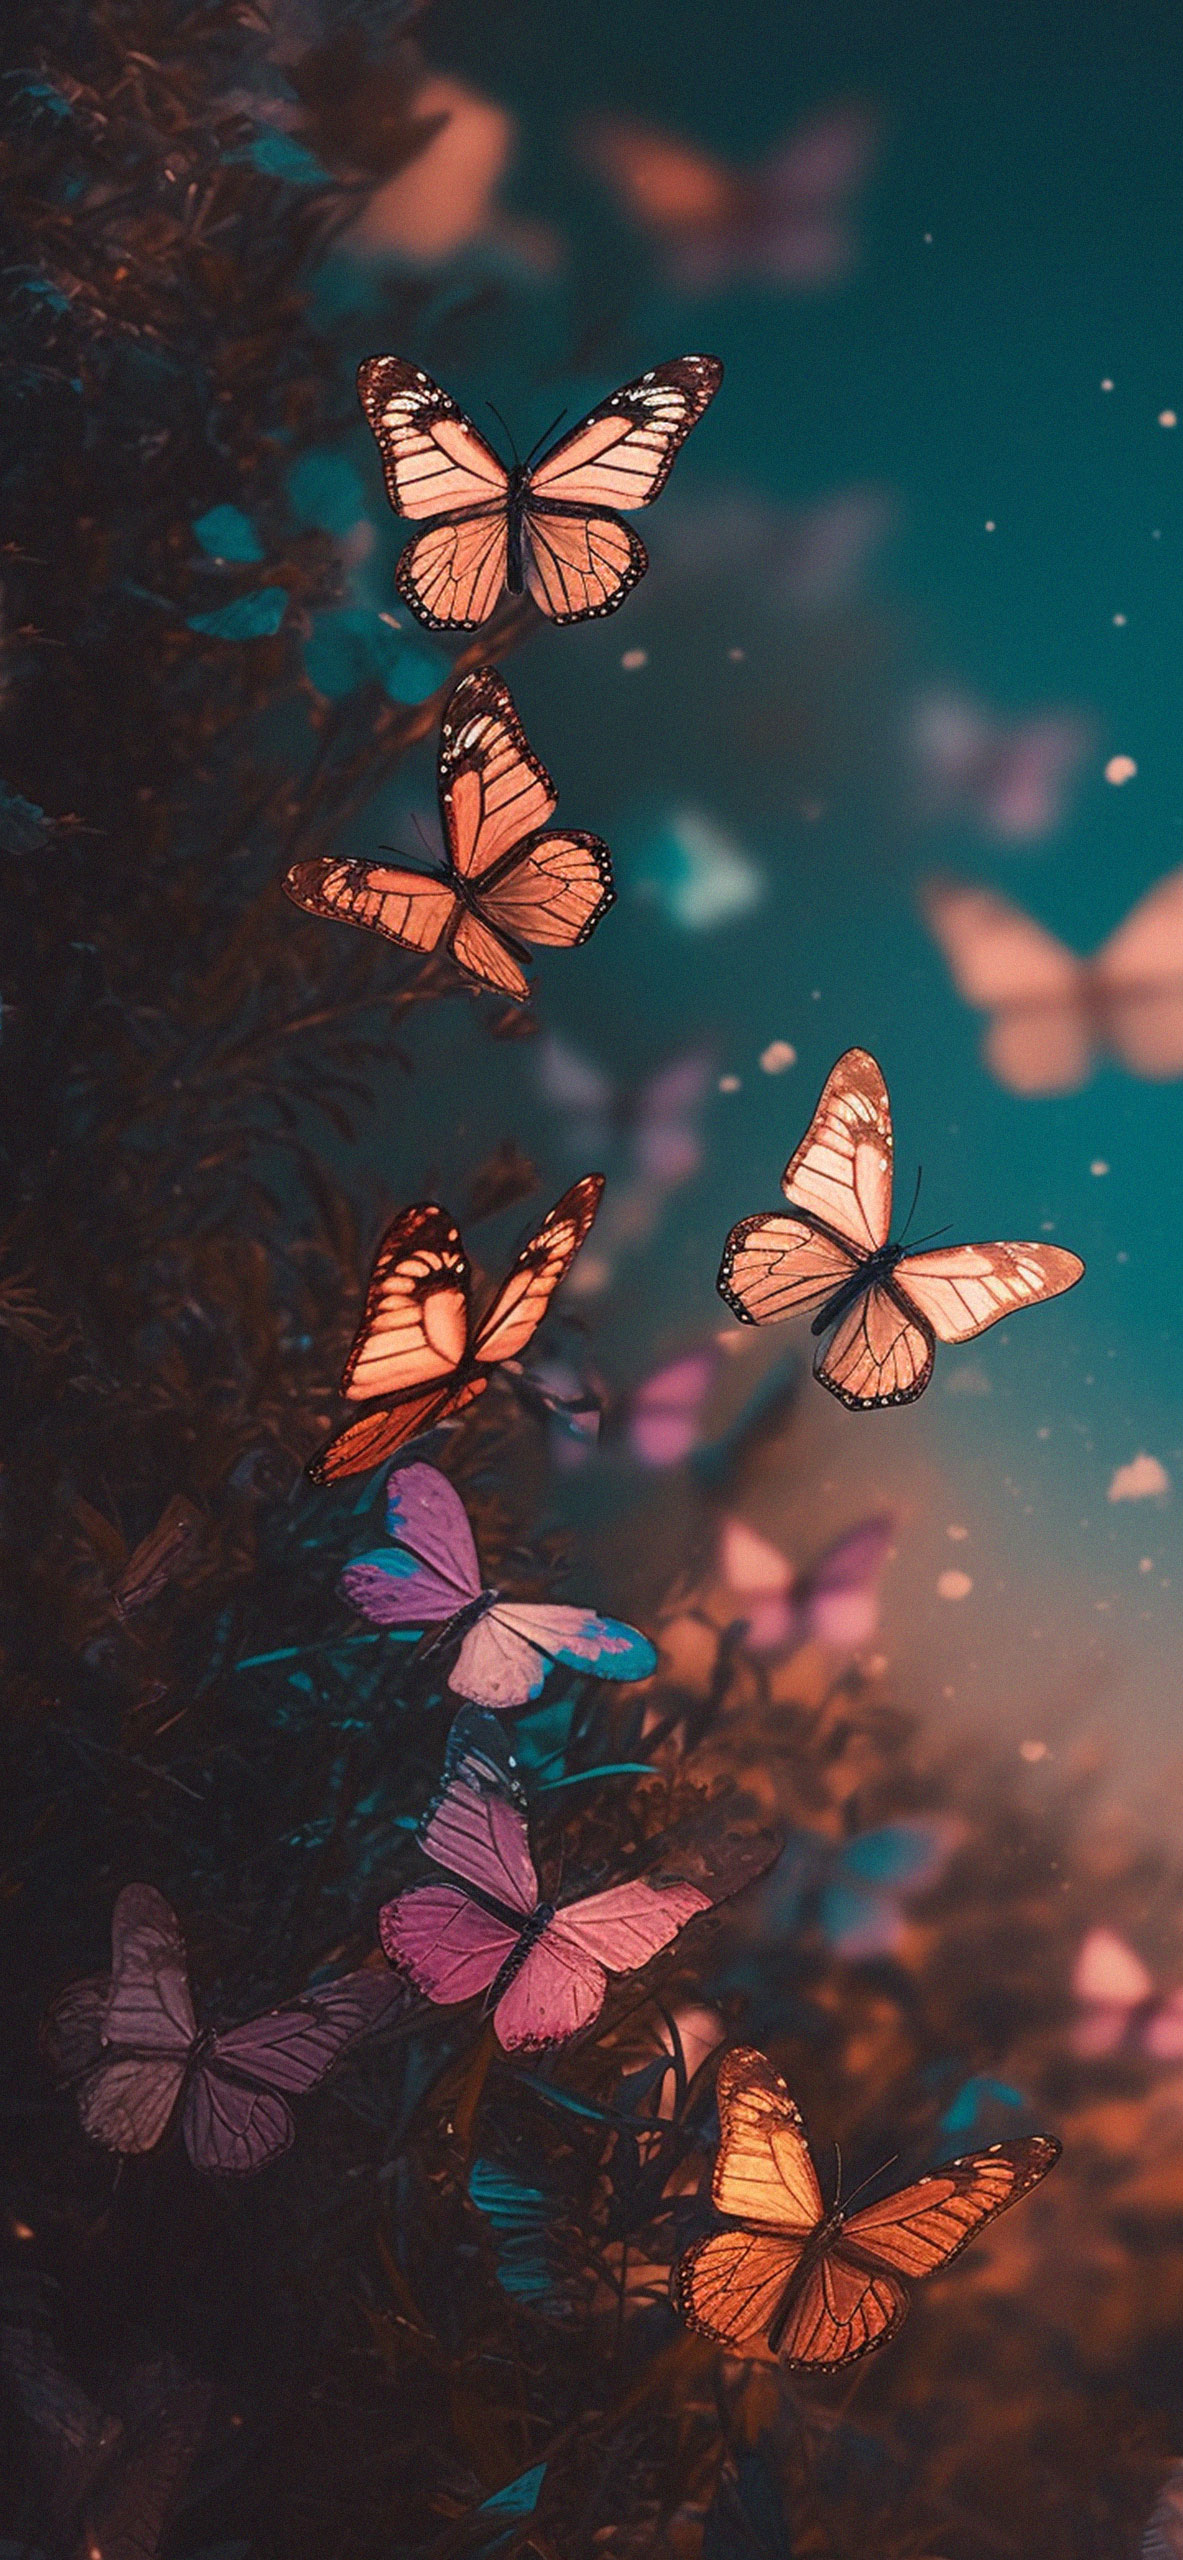 HD wallpaper Protection view hand friendly nature beautiful butterfly   Wallpaper Flare